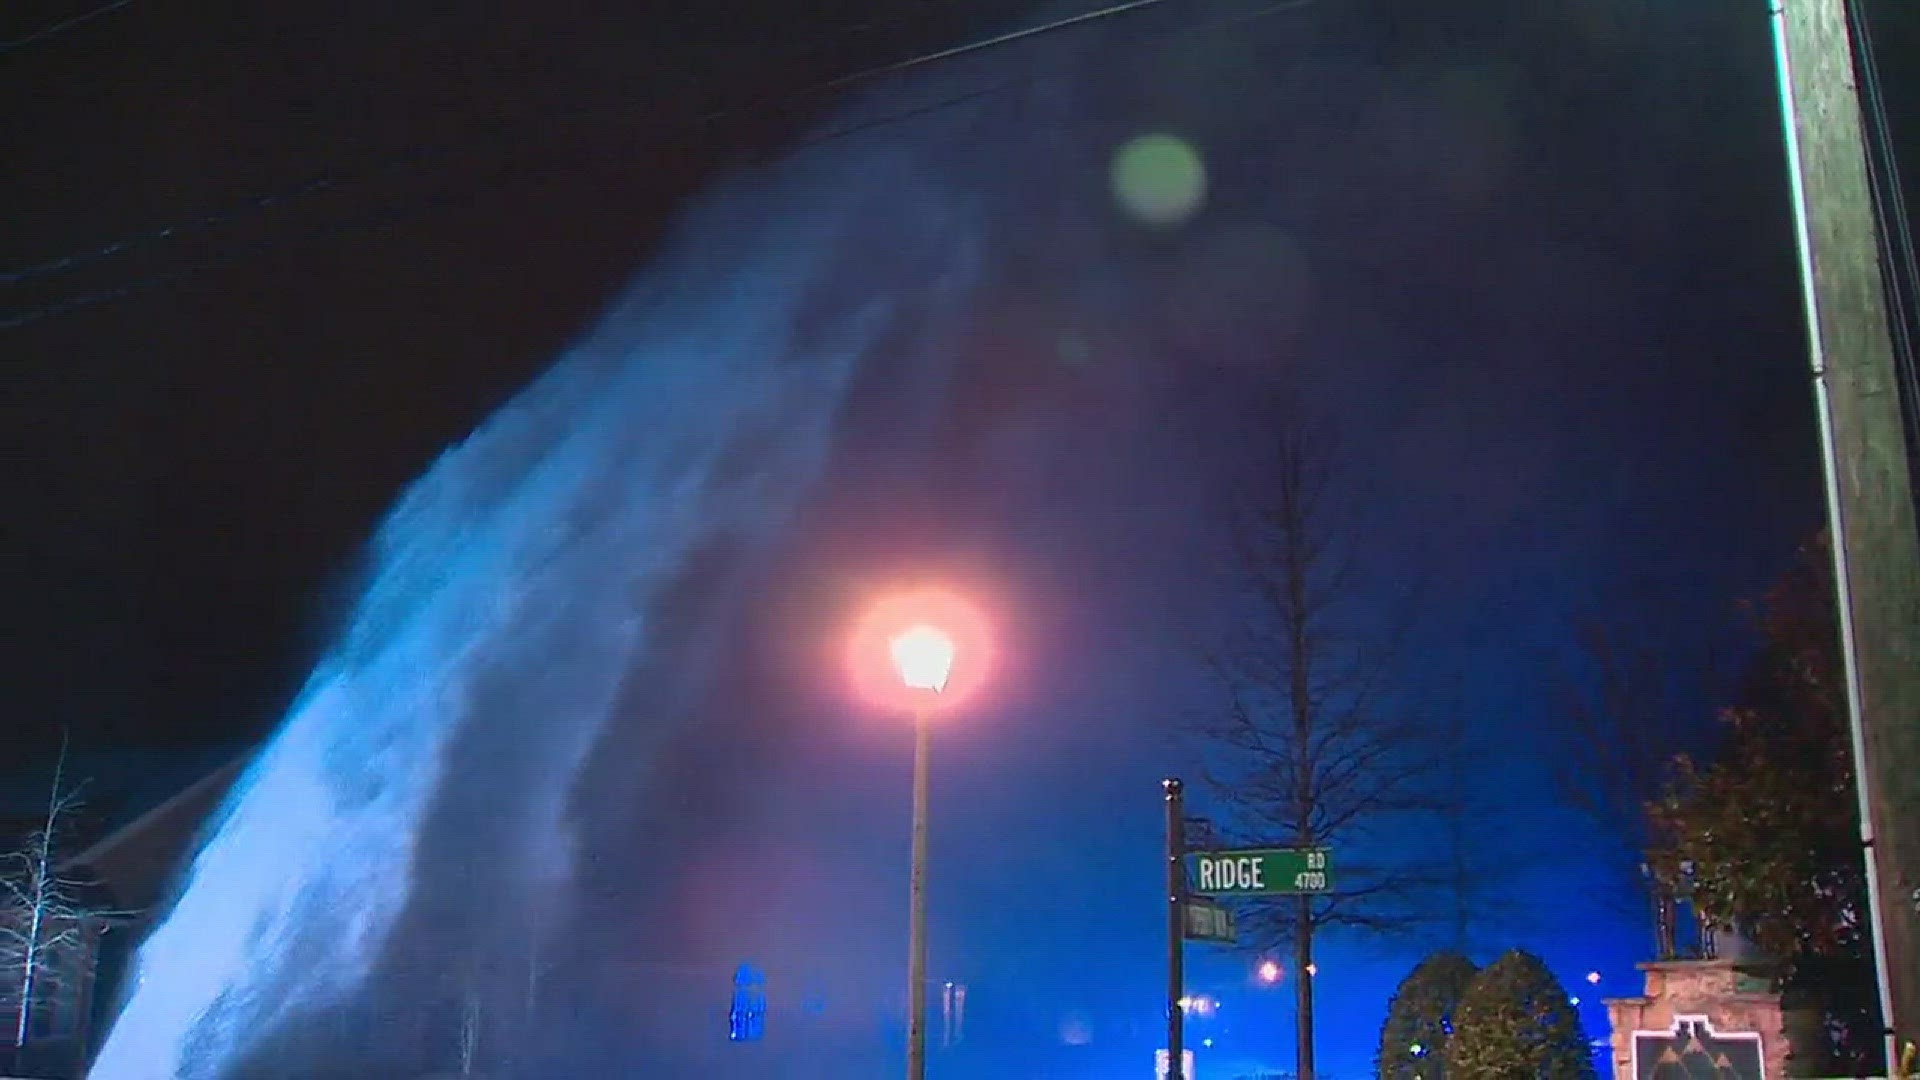 Dramatic footage was caught on camera after a water pipe break caused water to shoot 25 feet in the air Monday night.